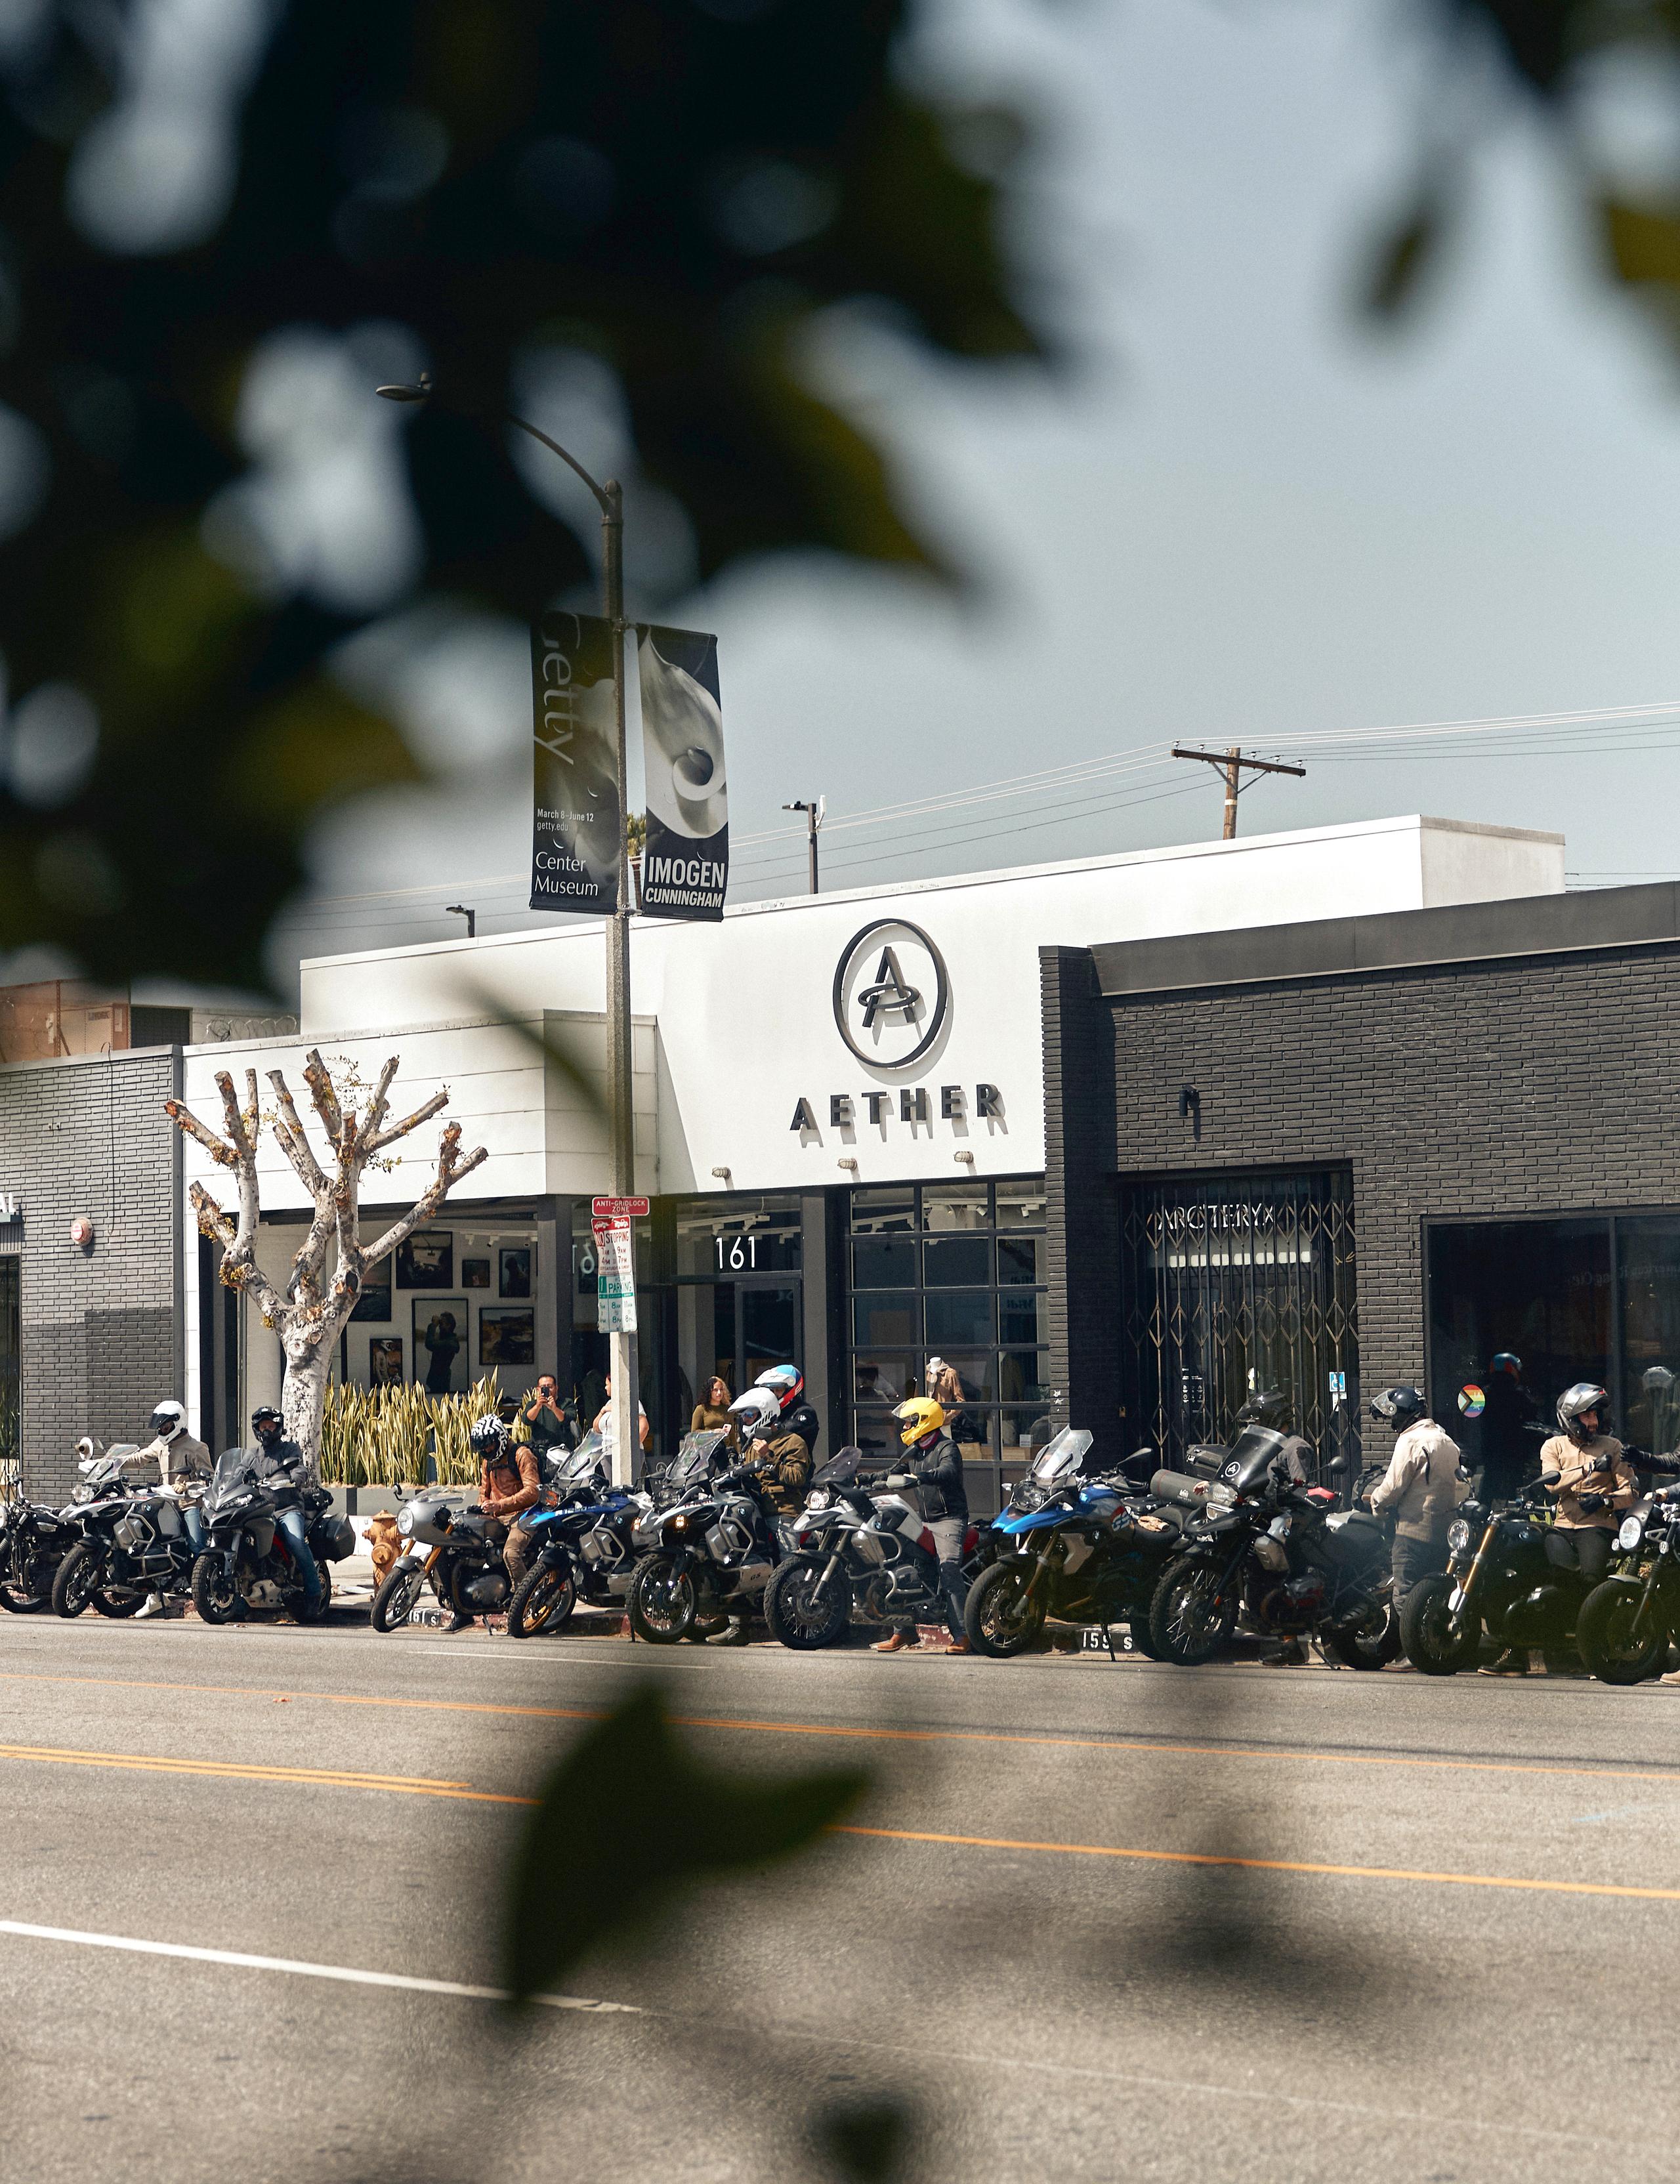 Exterior view of Los Angeles store with motorcycles lined up in front to start a group ride